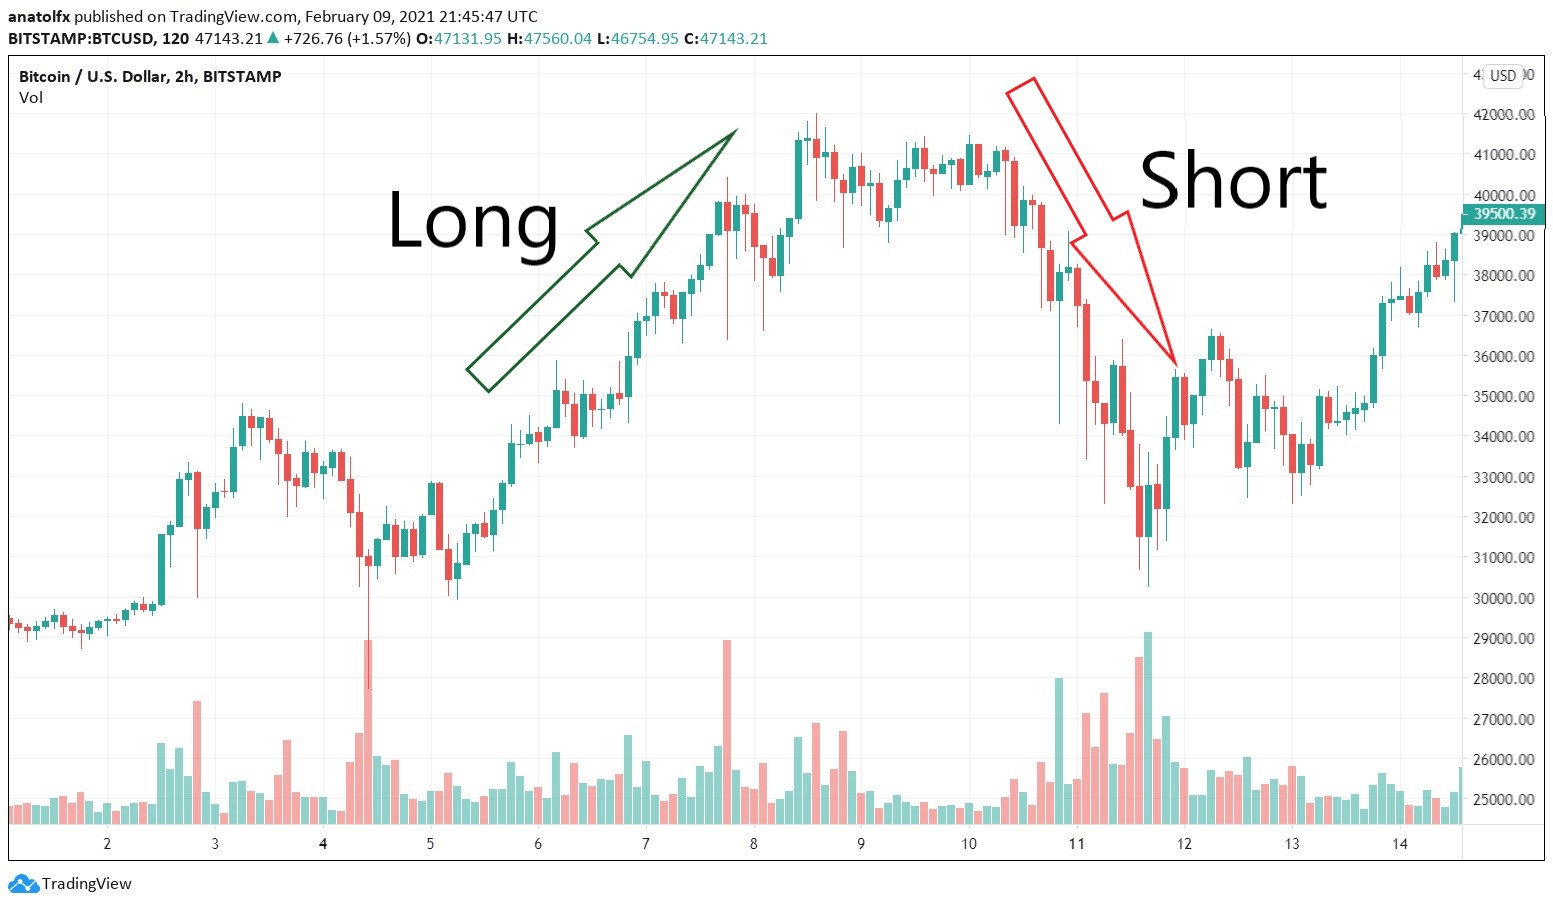 Long and short position